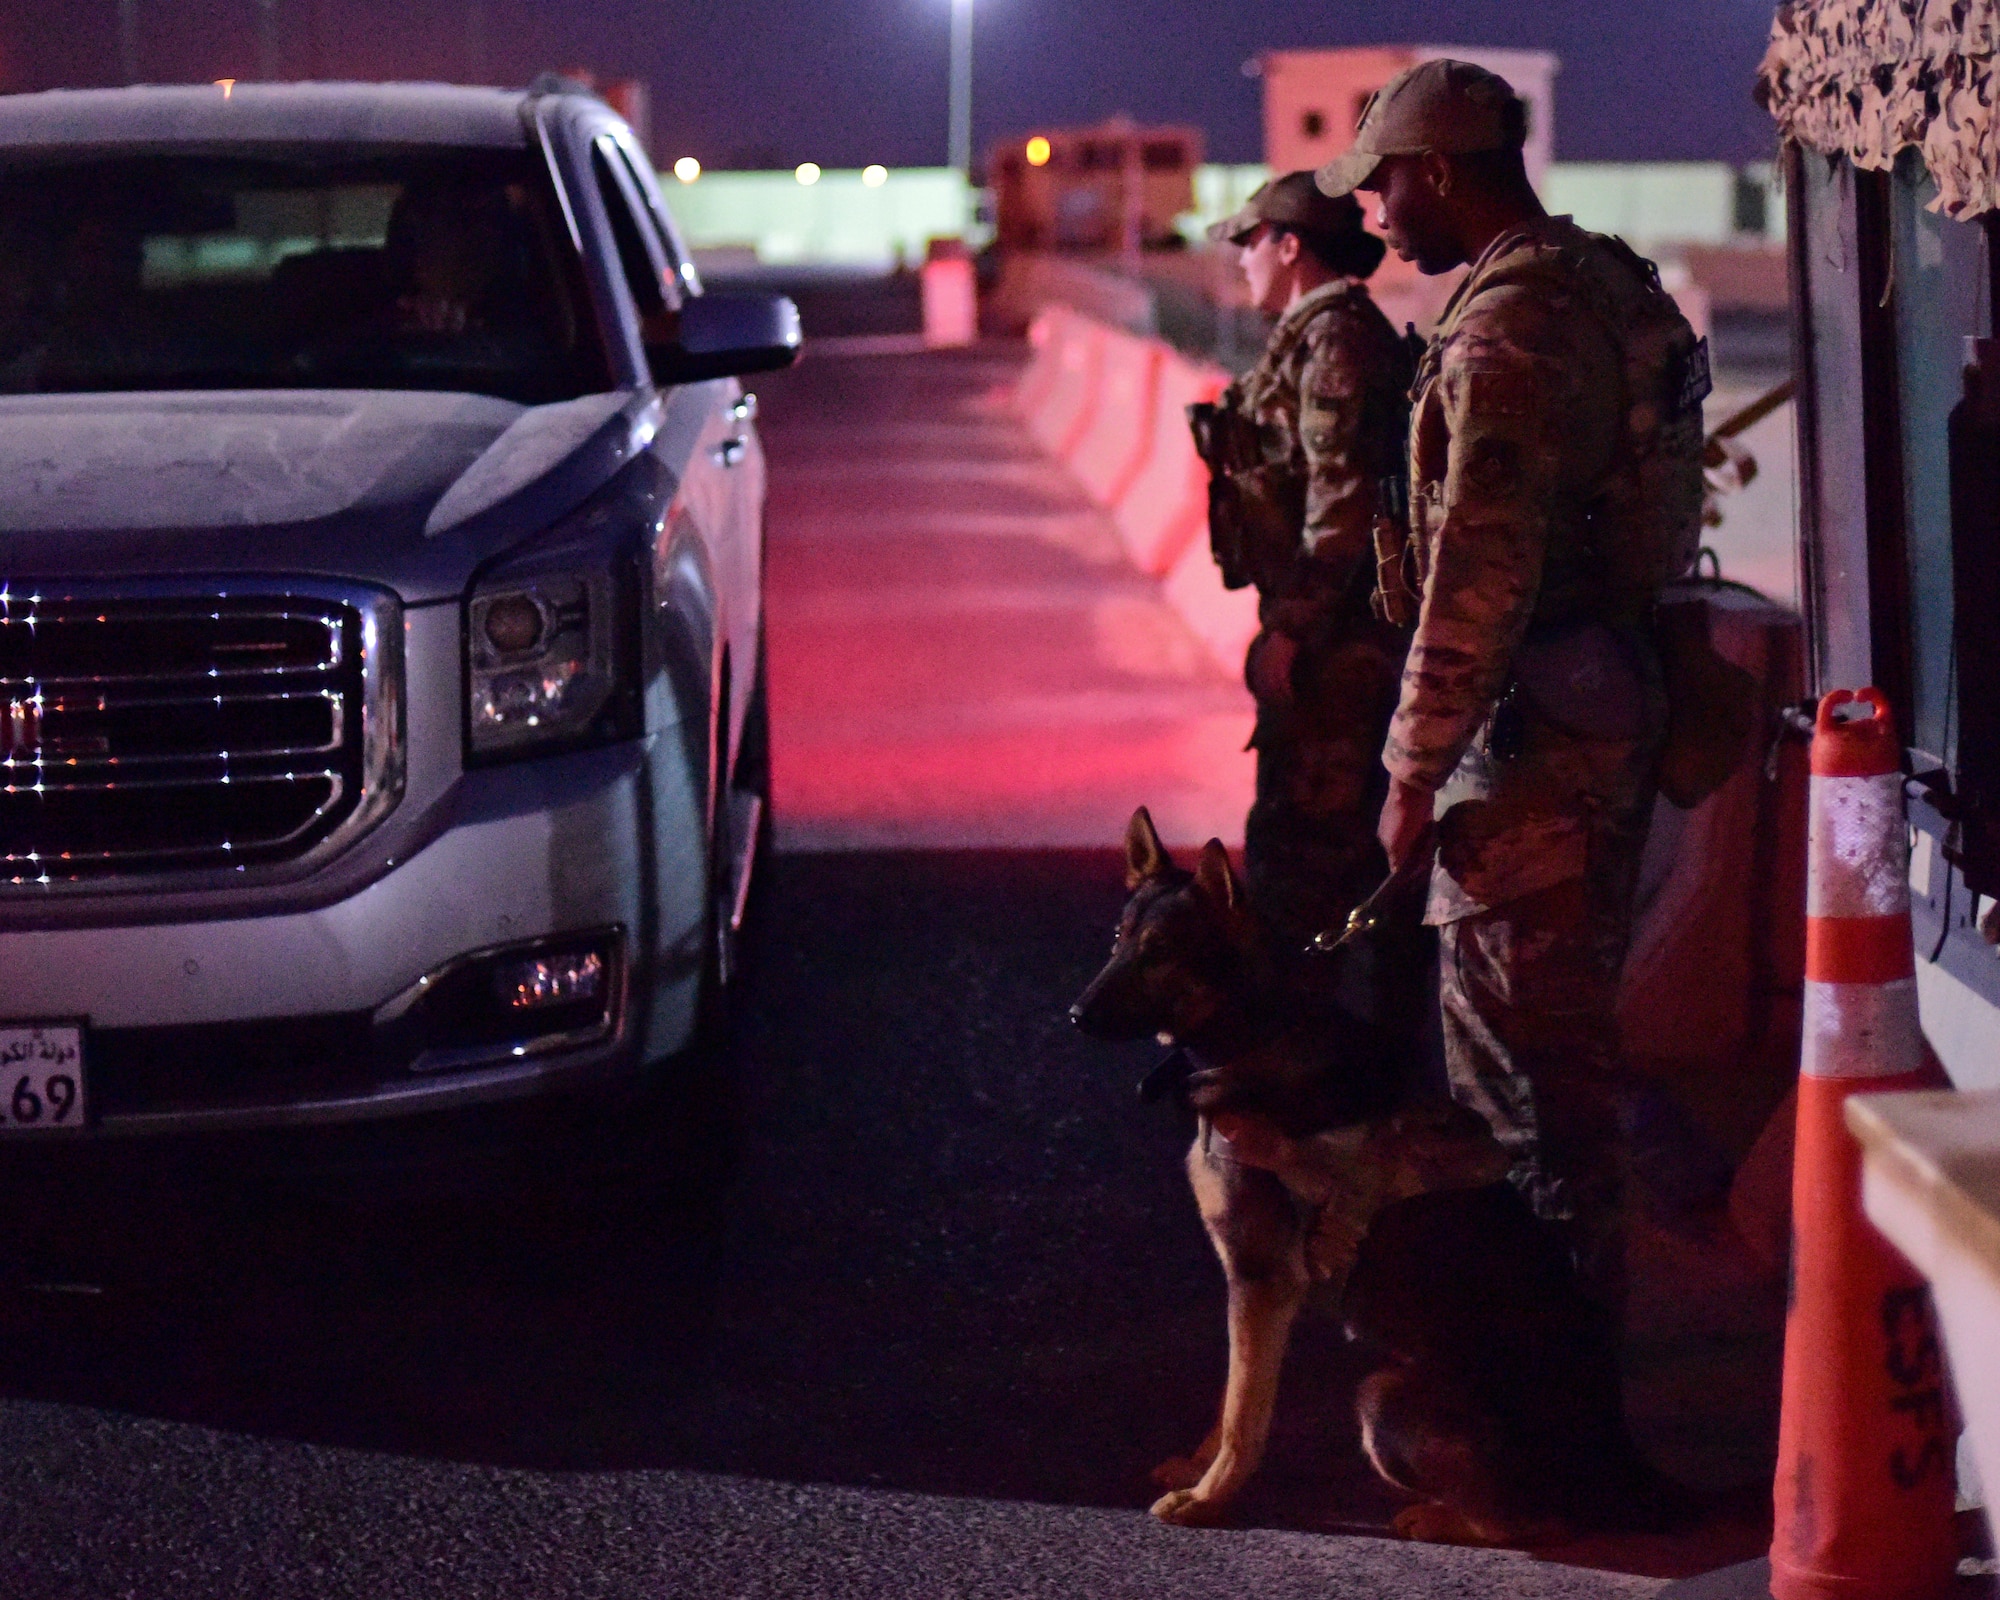 Military Working Dog handler prepares to execute a vehicle search